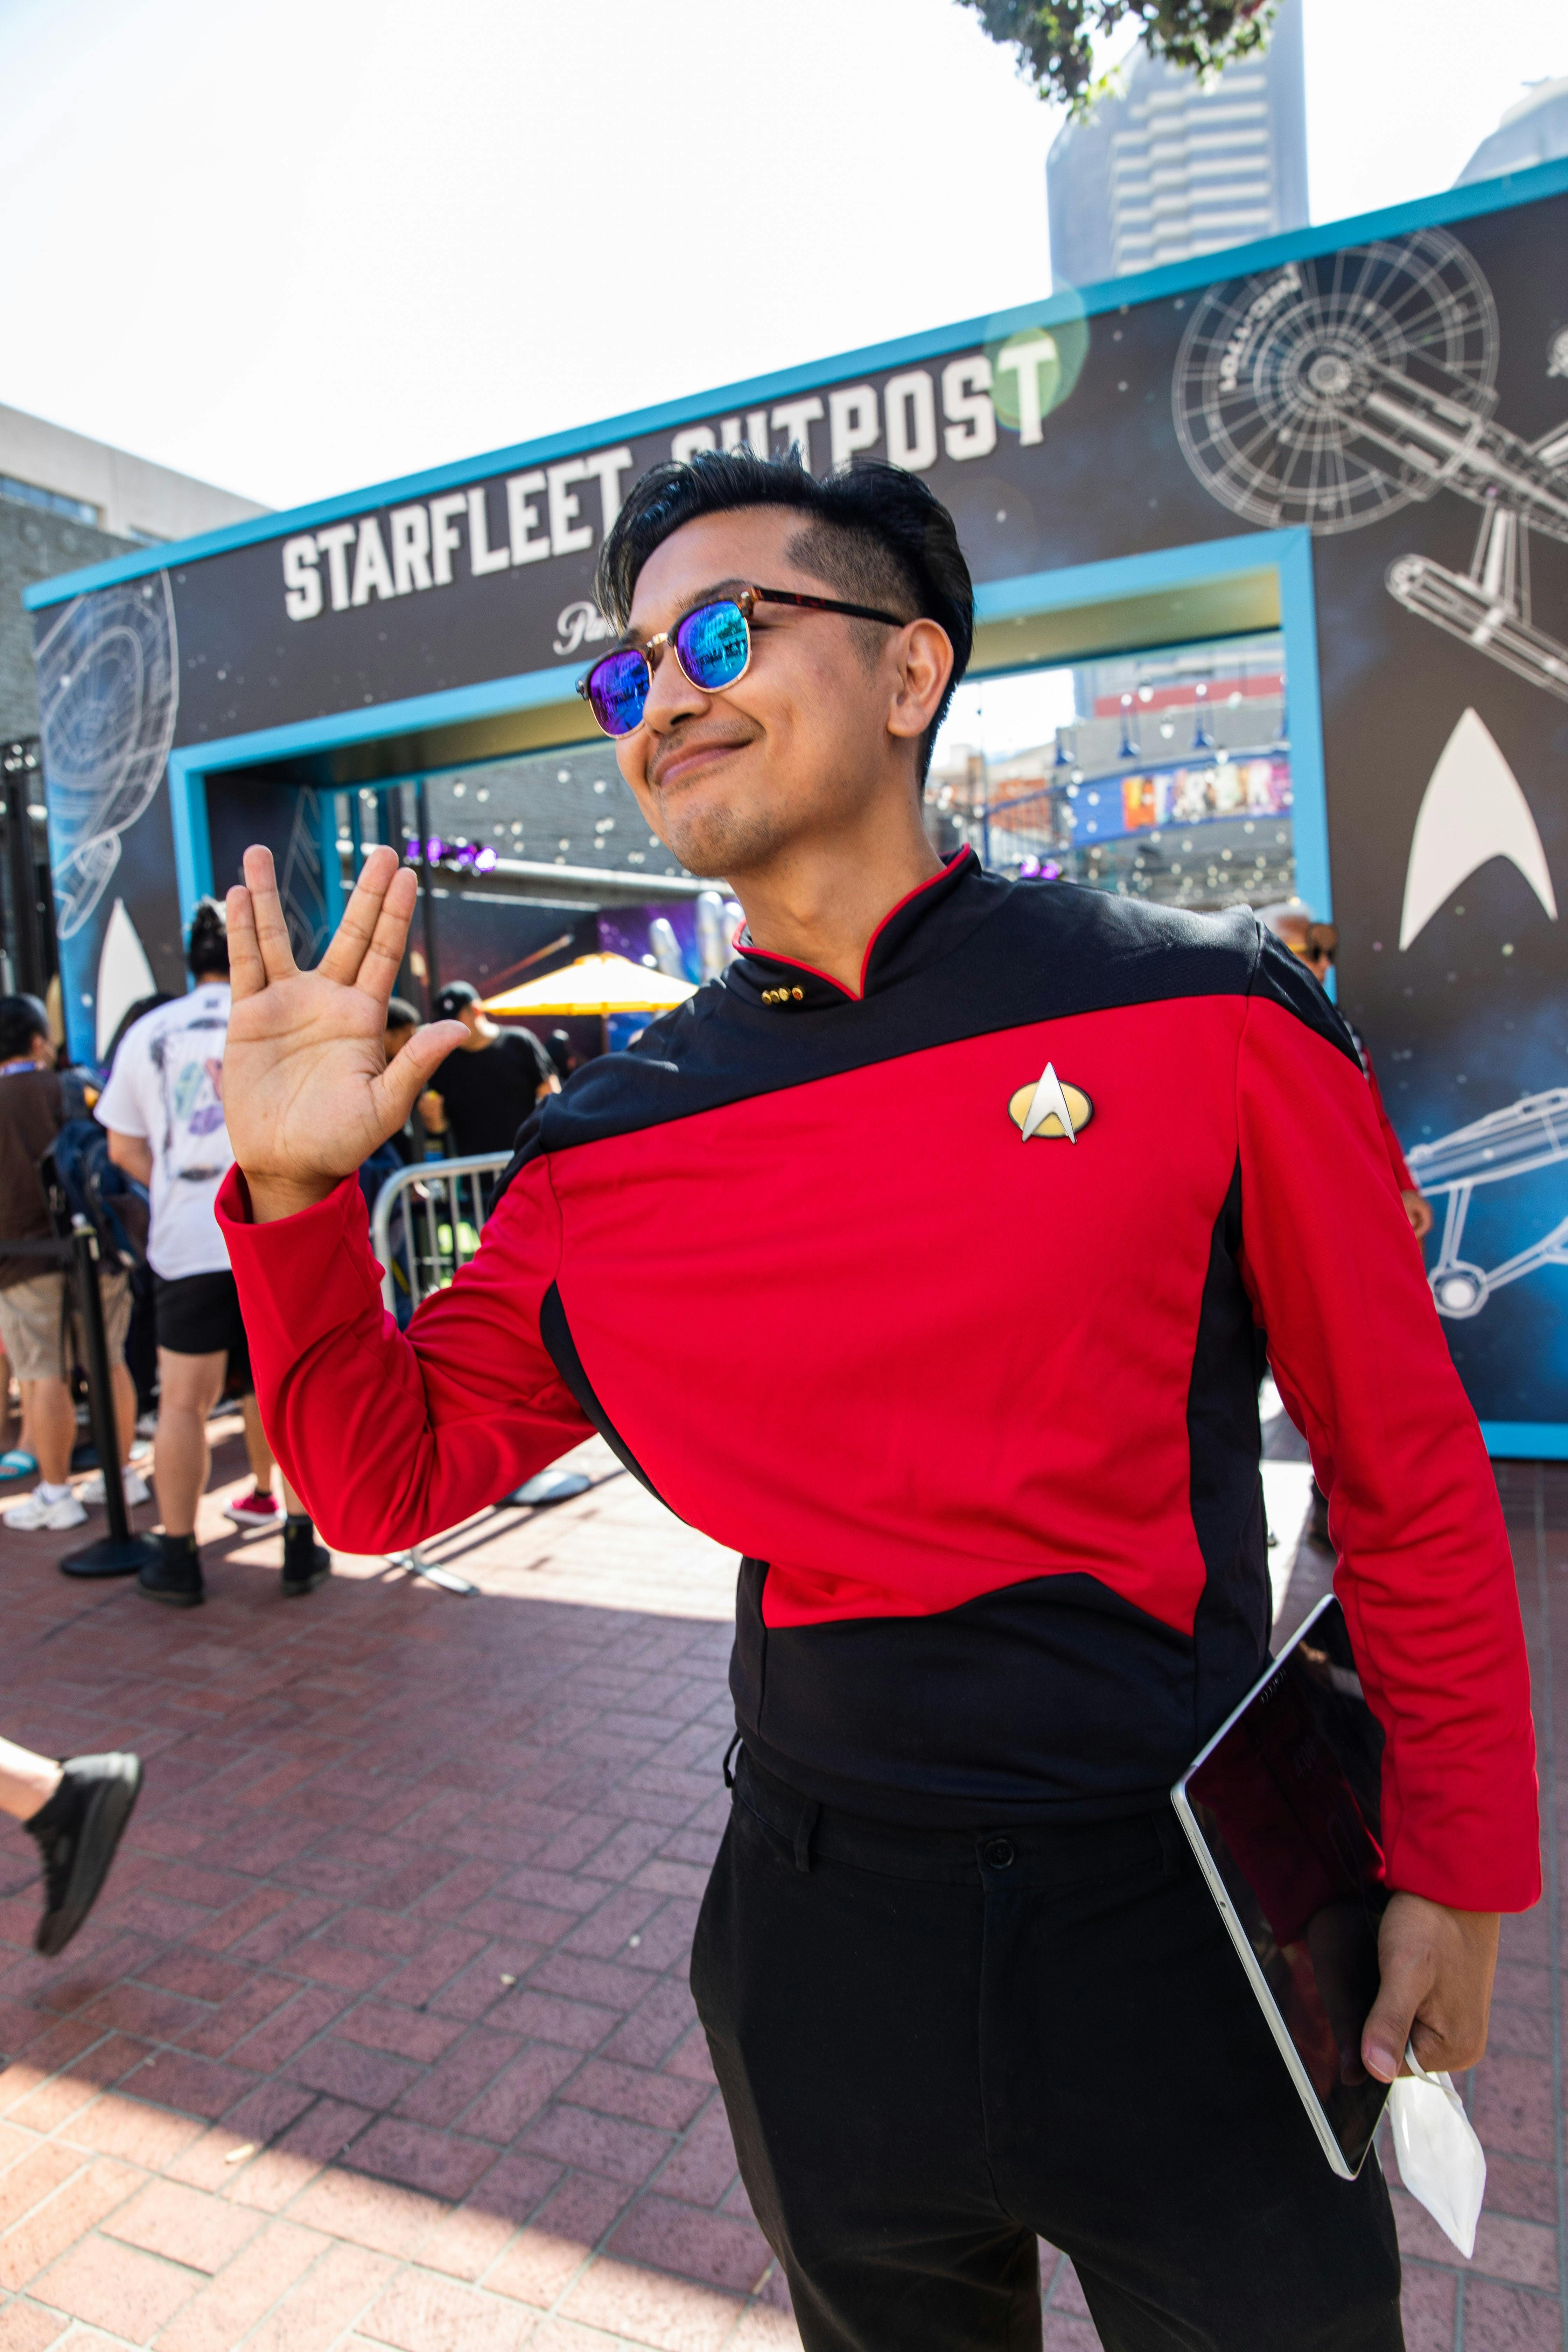 A fan gives the camera a Vulcan salute.